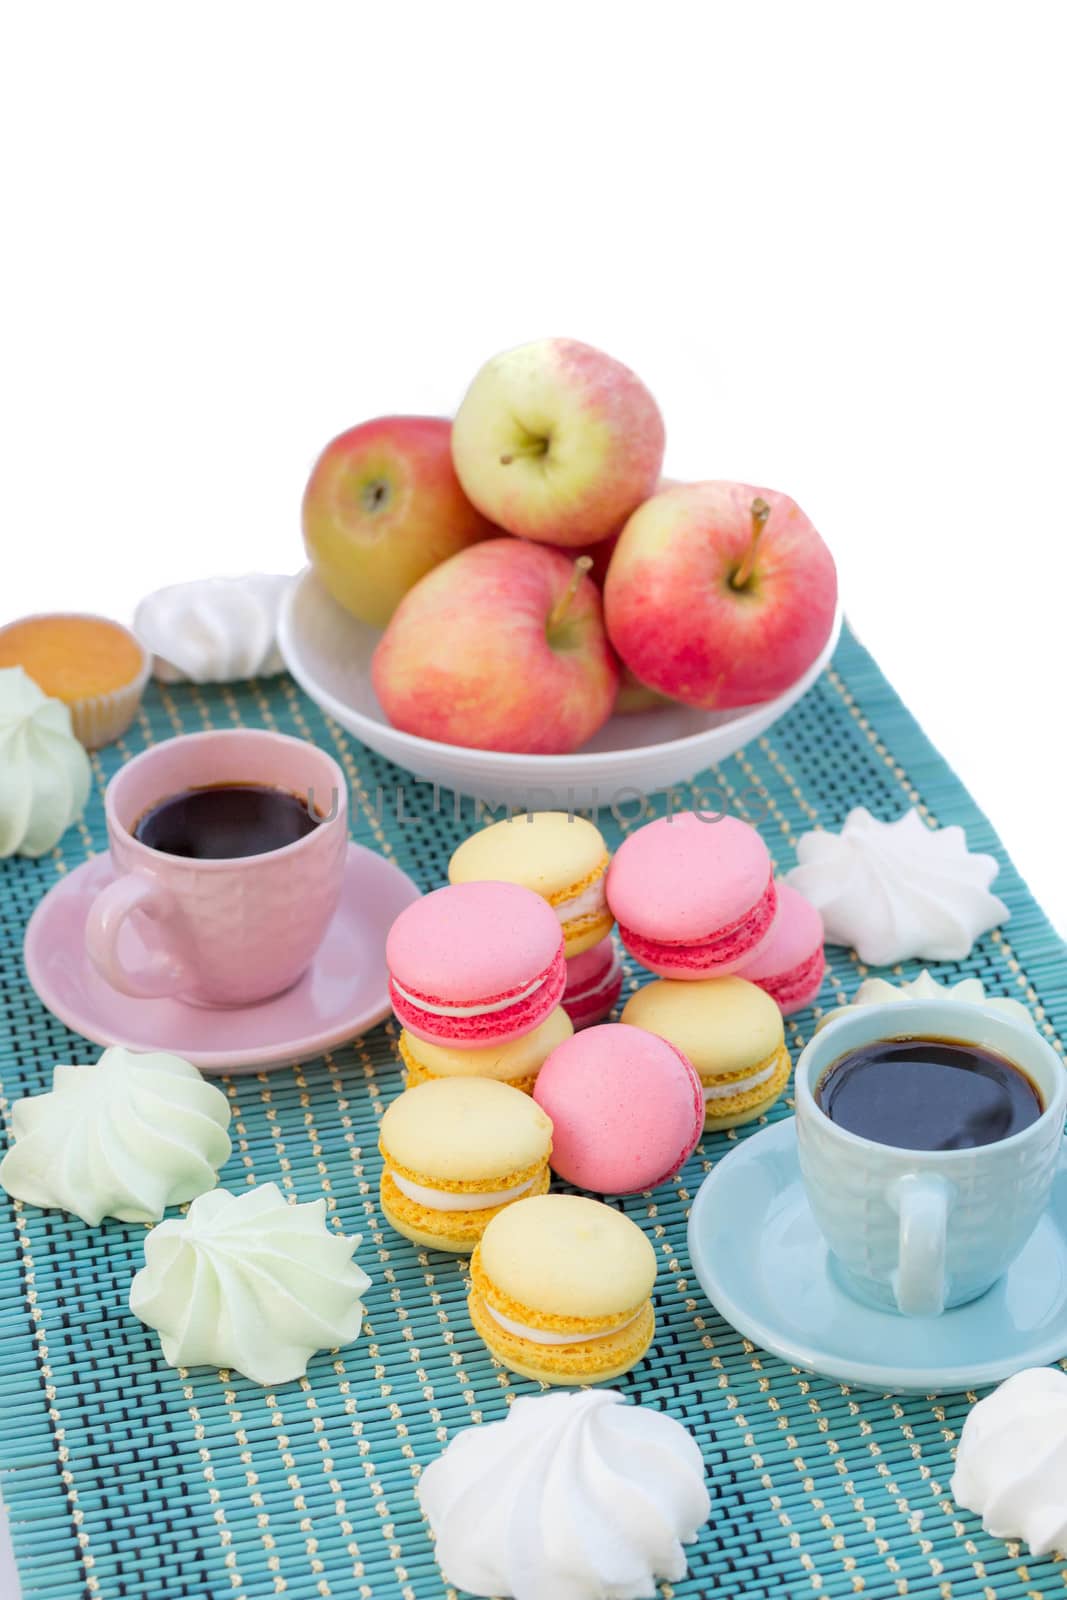 Still life of served coffee cups, macaroon cookies, marshmallows and apples